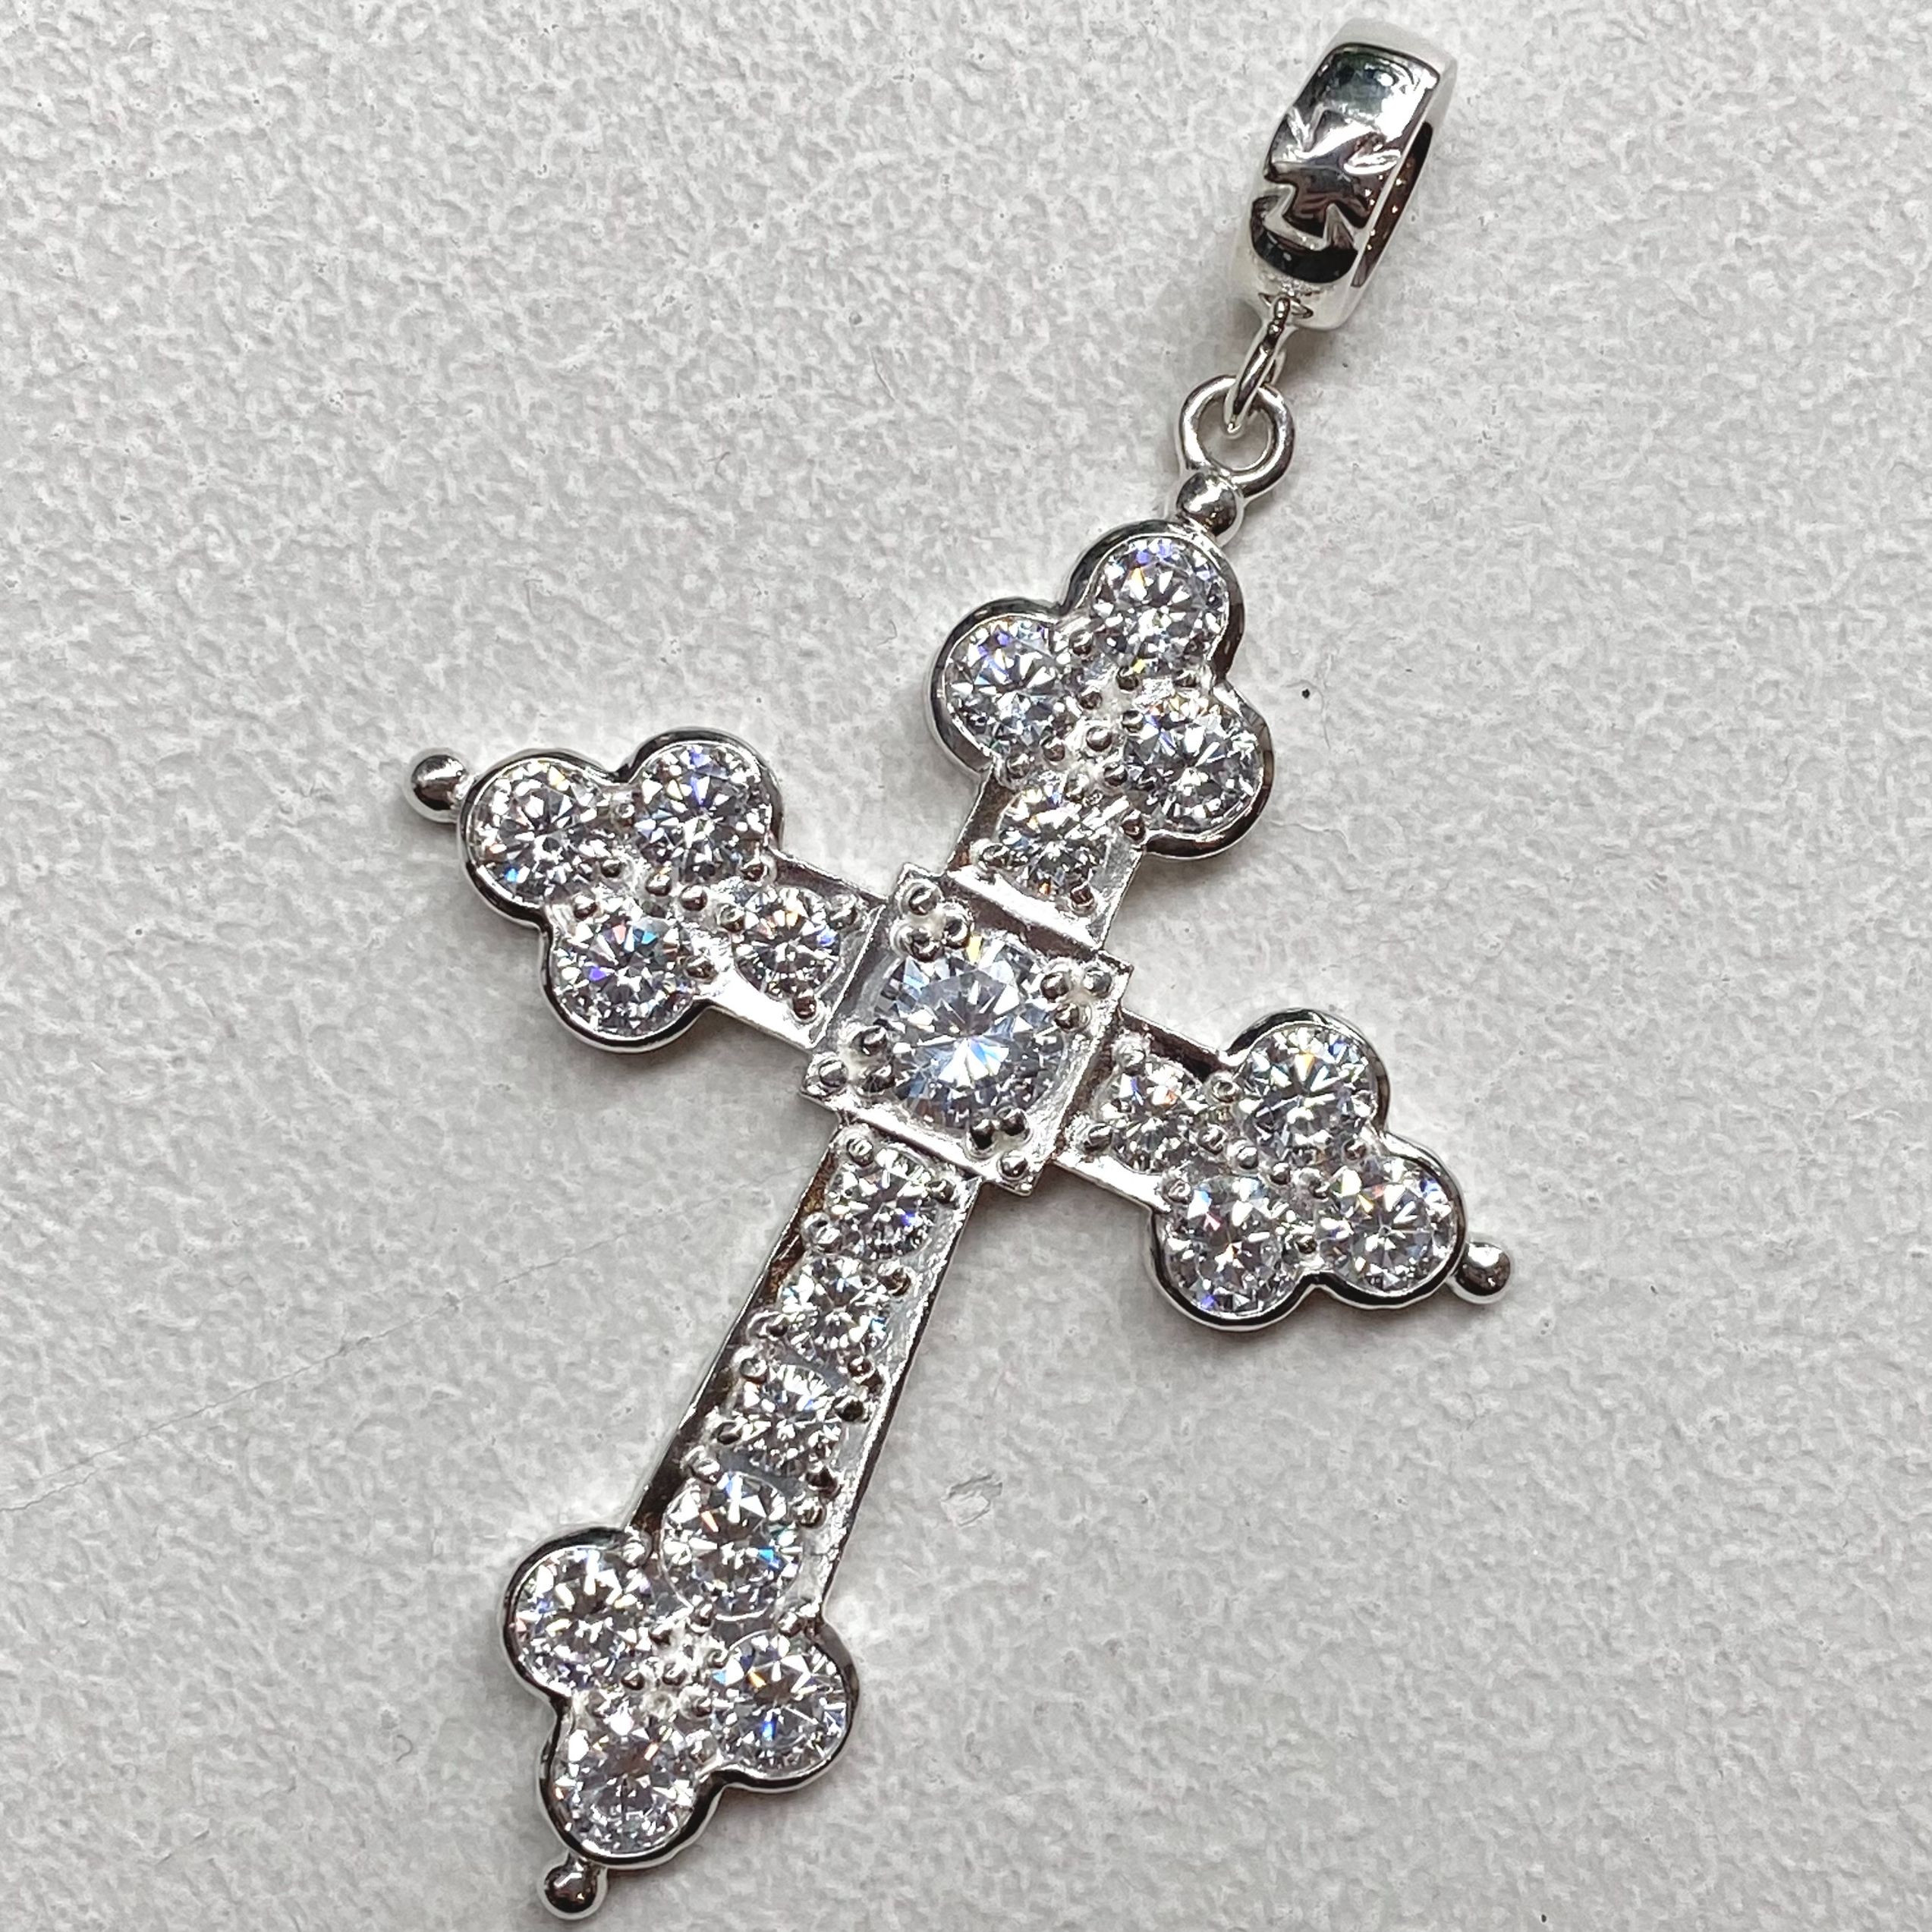 GIANT GOTHIC CROSS SILVER/ZILCONIA